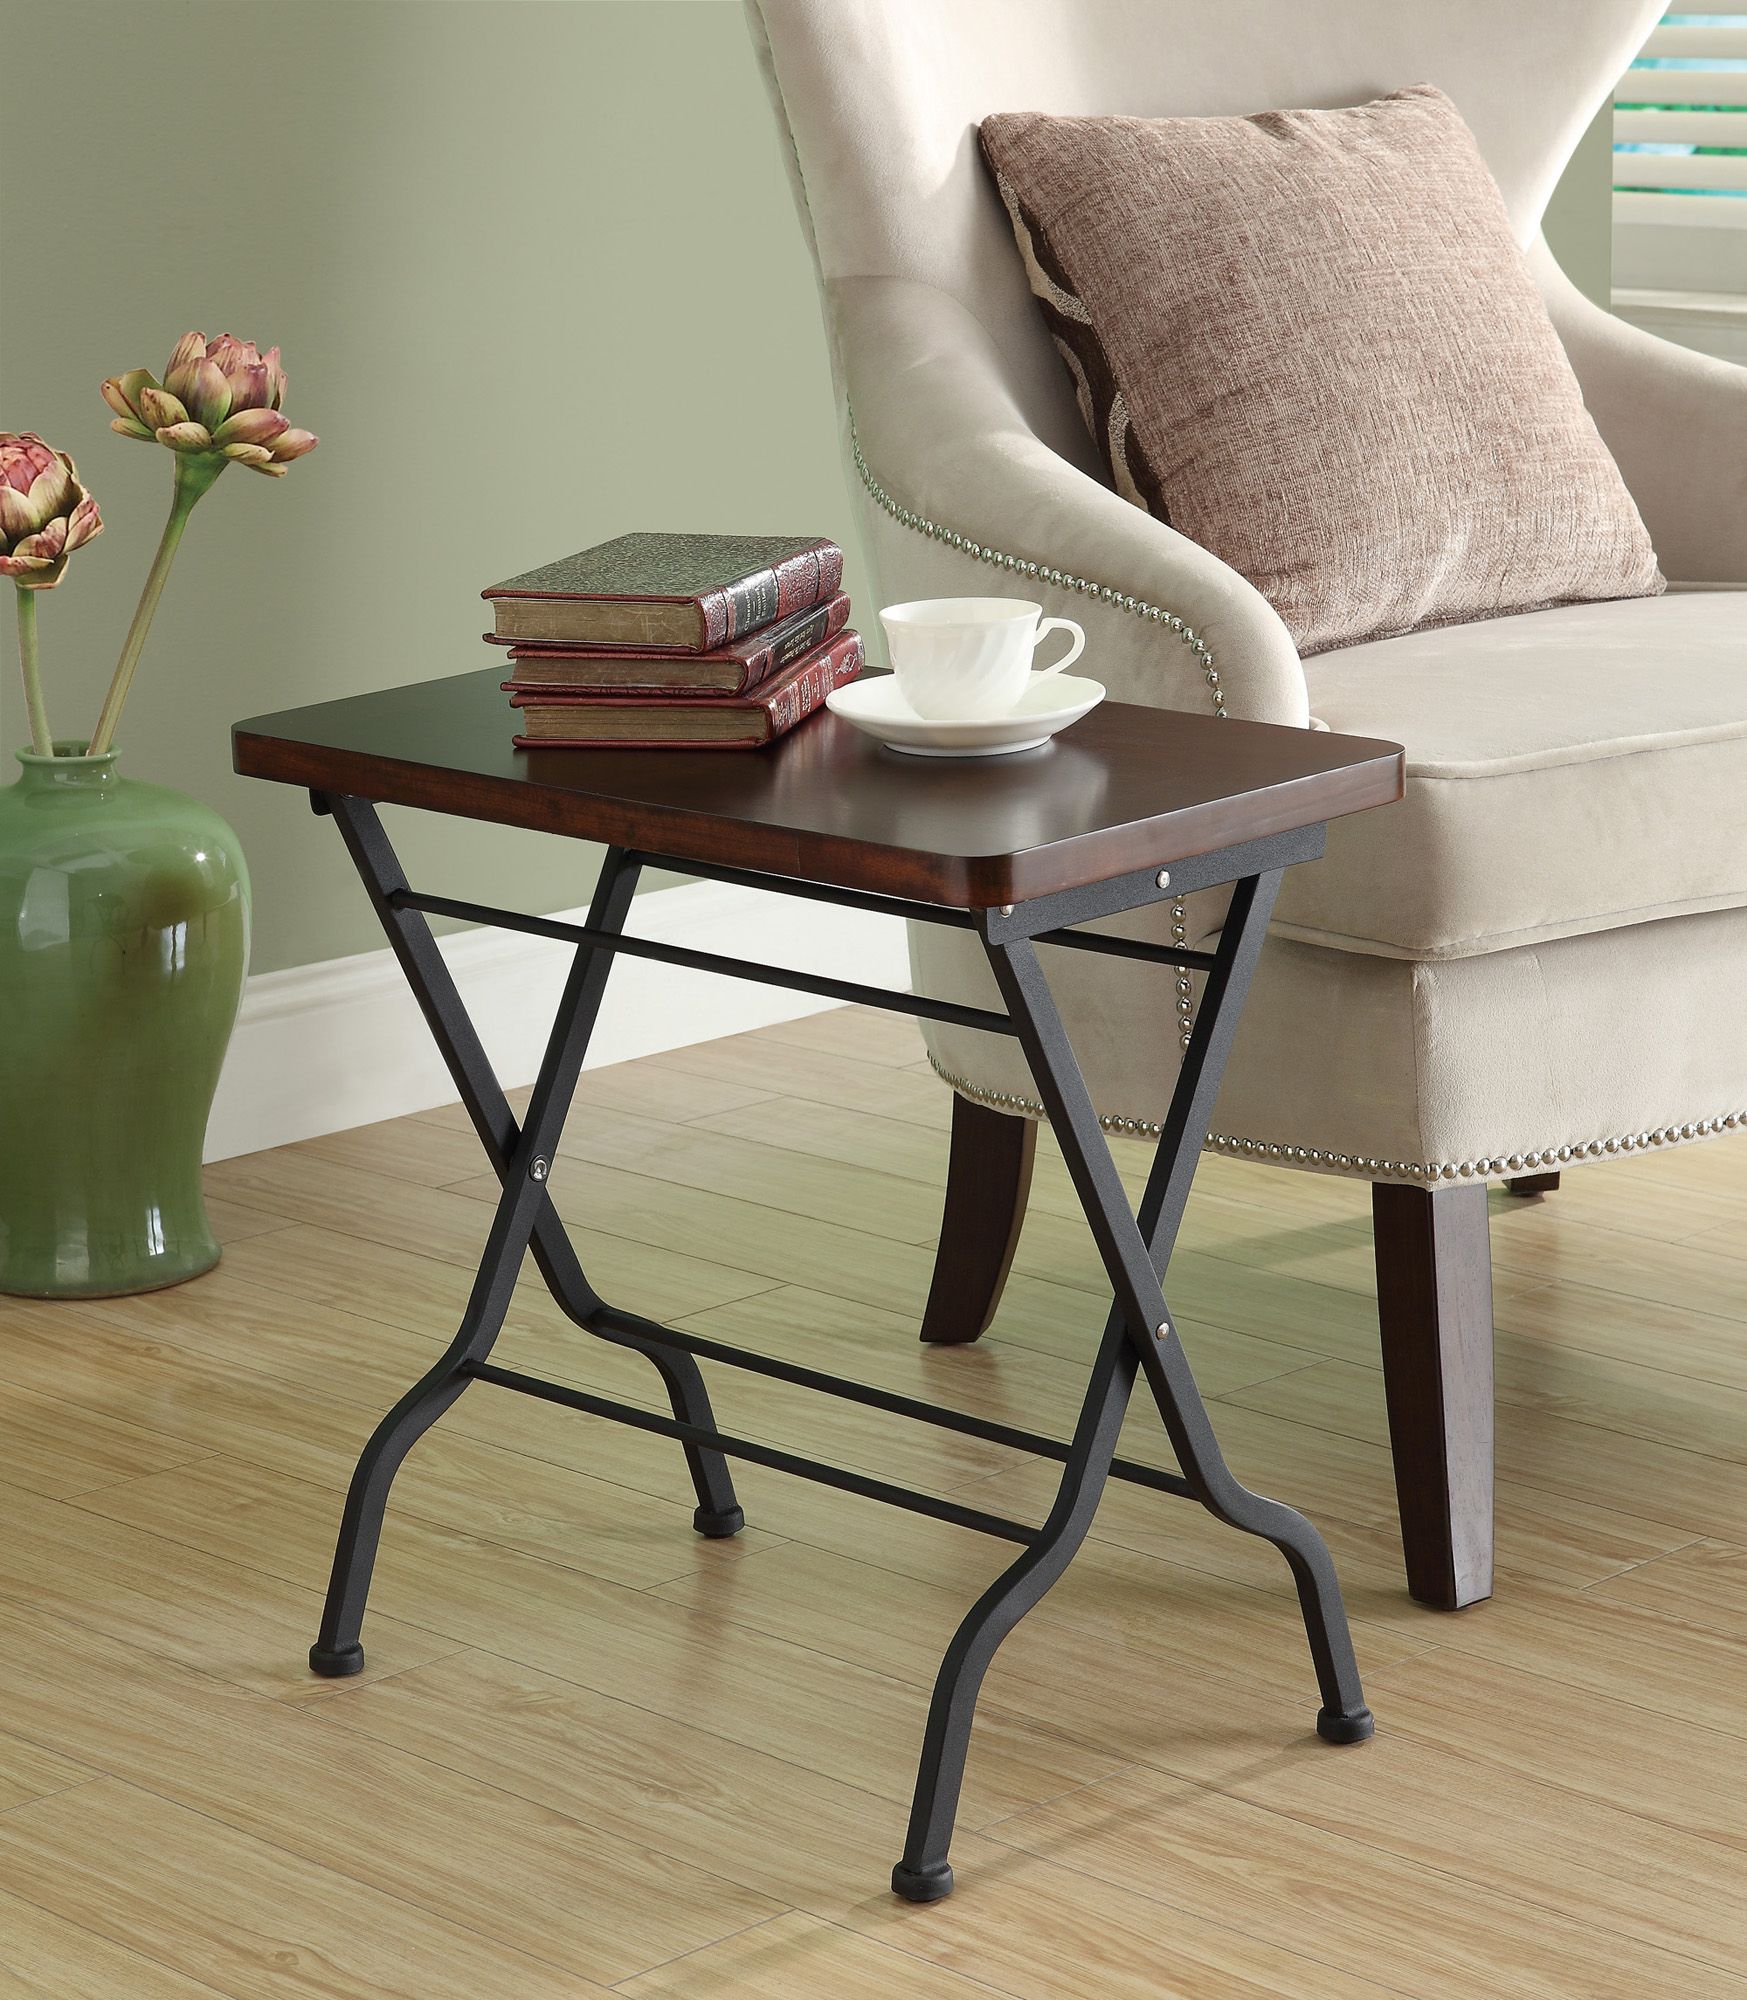 Monarch Specialties ACCENT TABLE - CHERRY / CHARCOAL BLACK METAL FOLDING